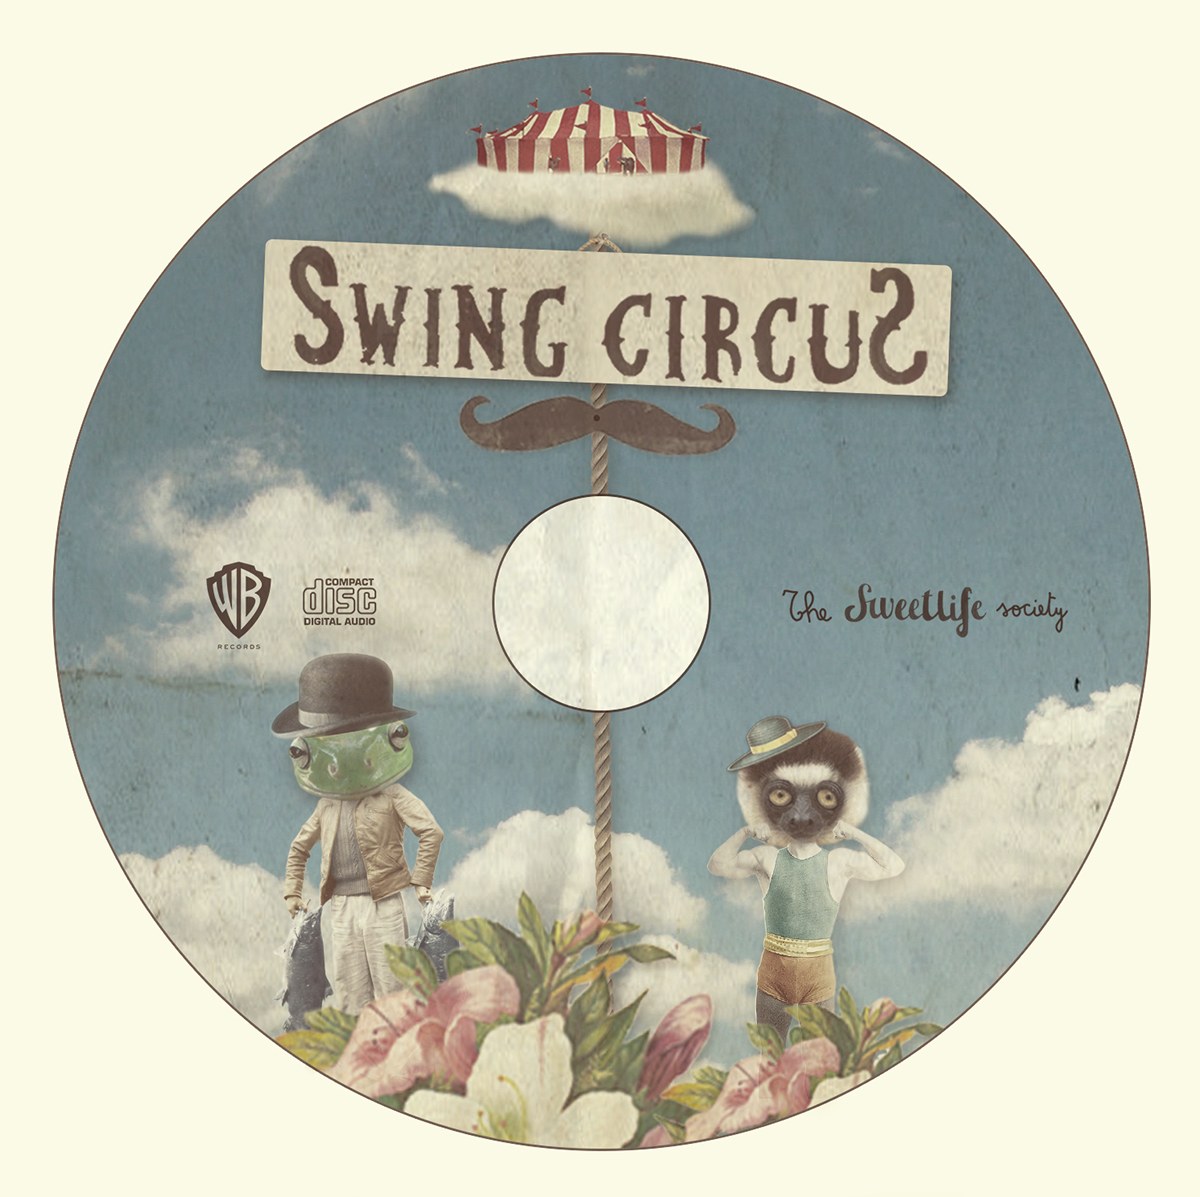 swing circus Album Warner Music sweet life society electroswing electro swing REMIX hip hop collage print Project